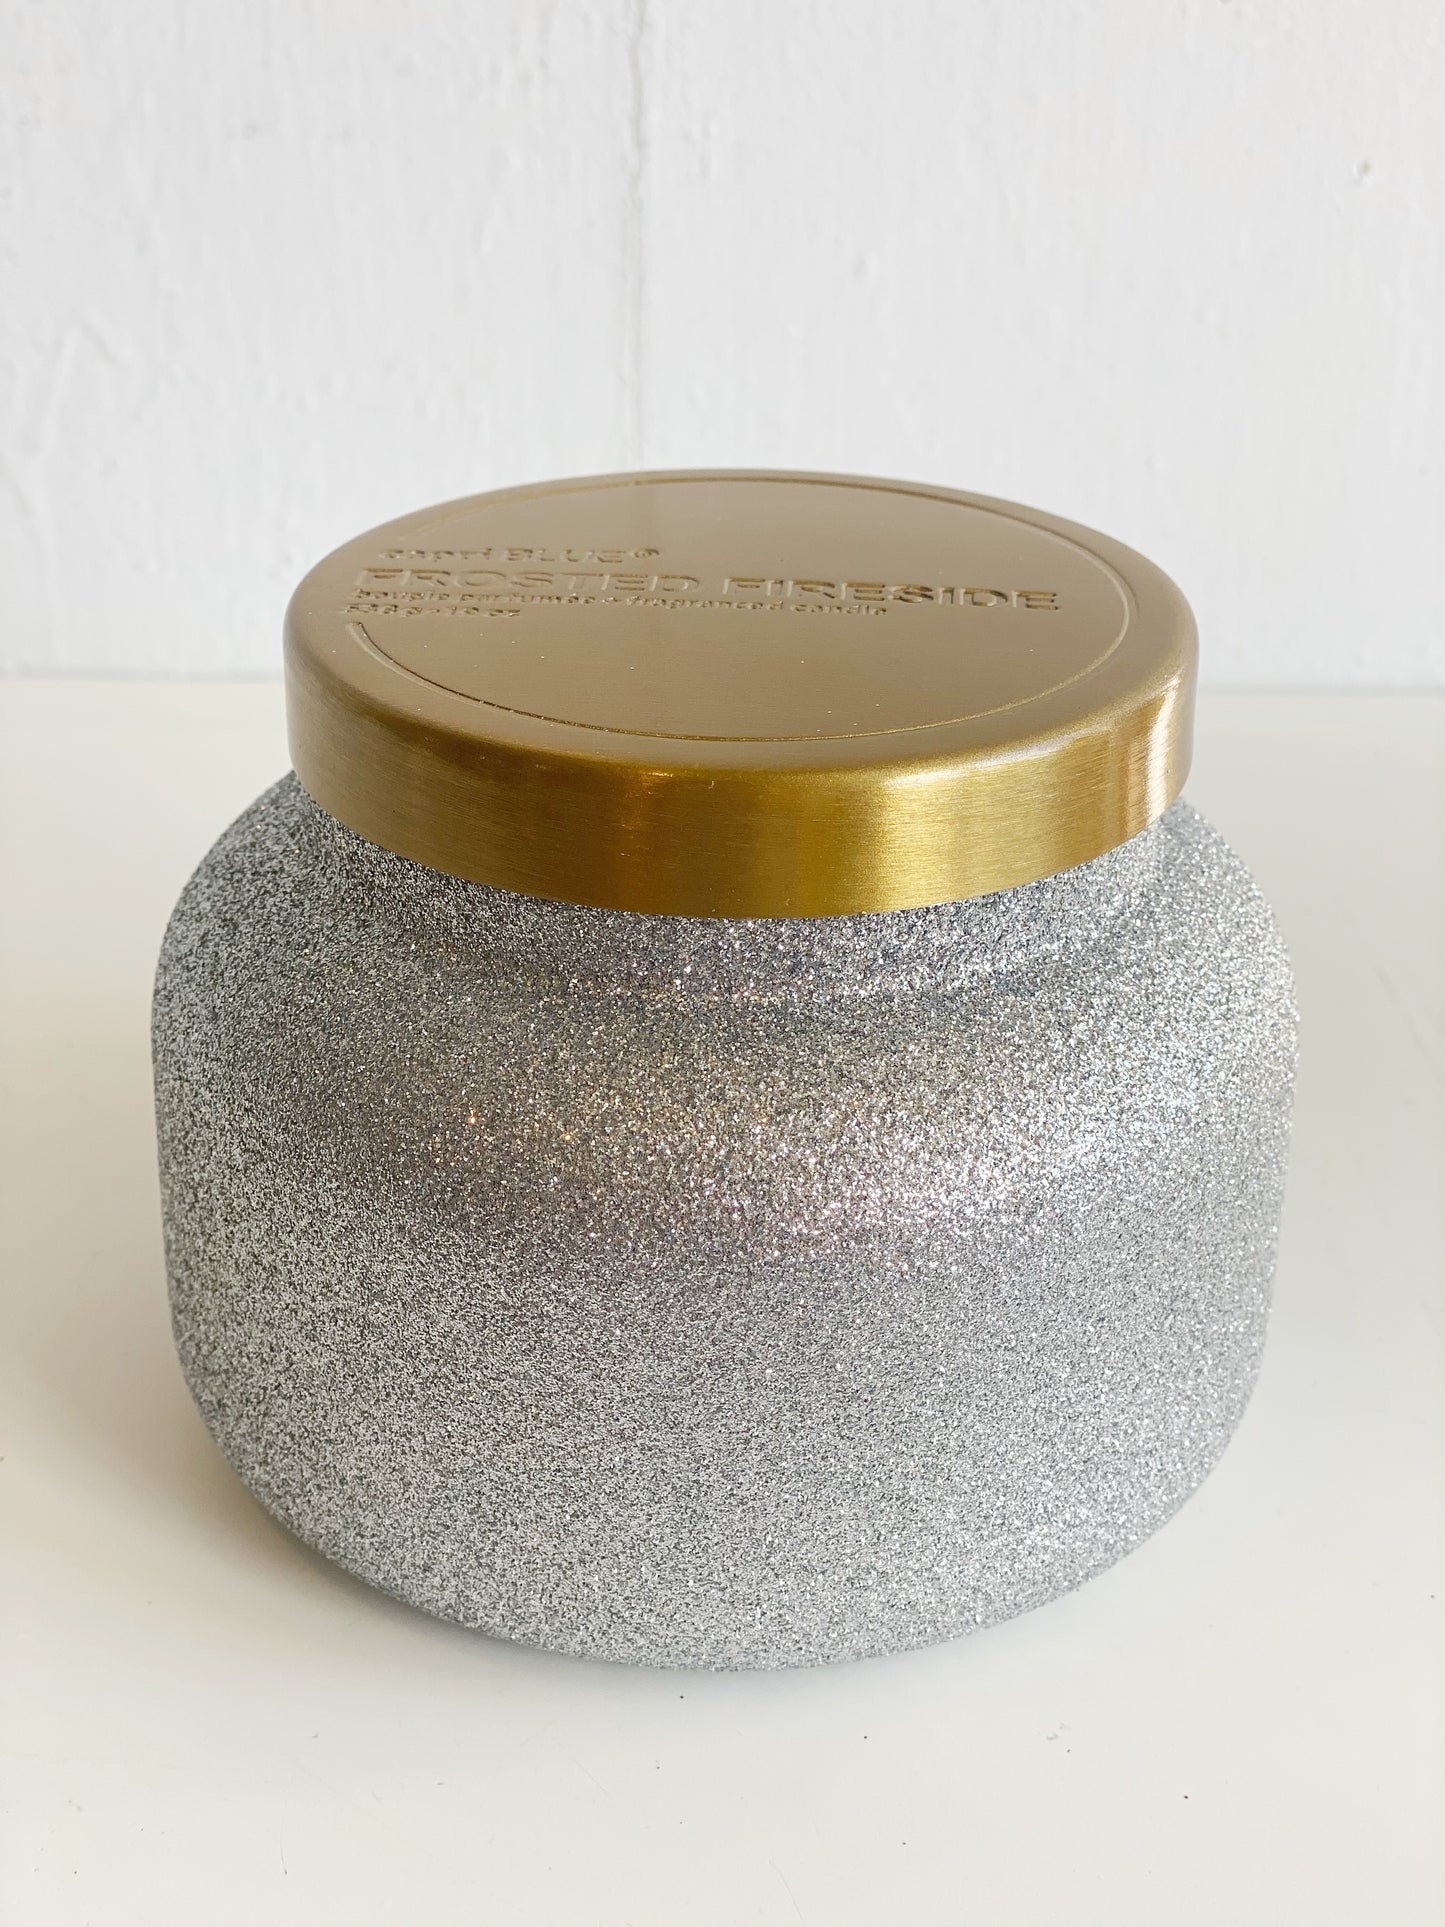 Frosted Fireside Glam Jar Candle by CapriBlue